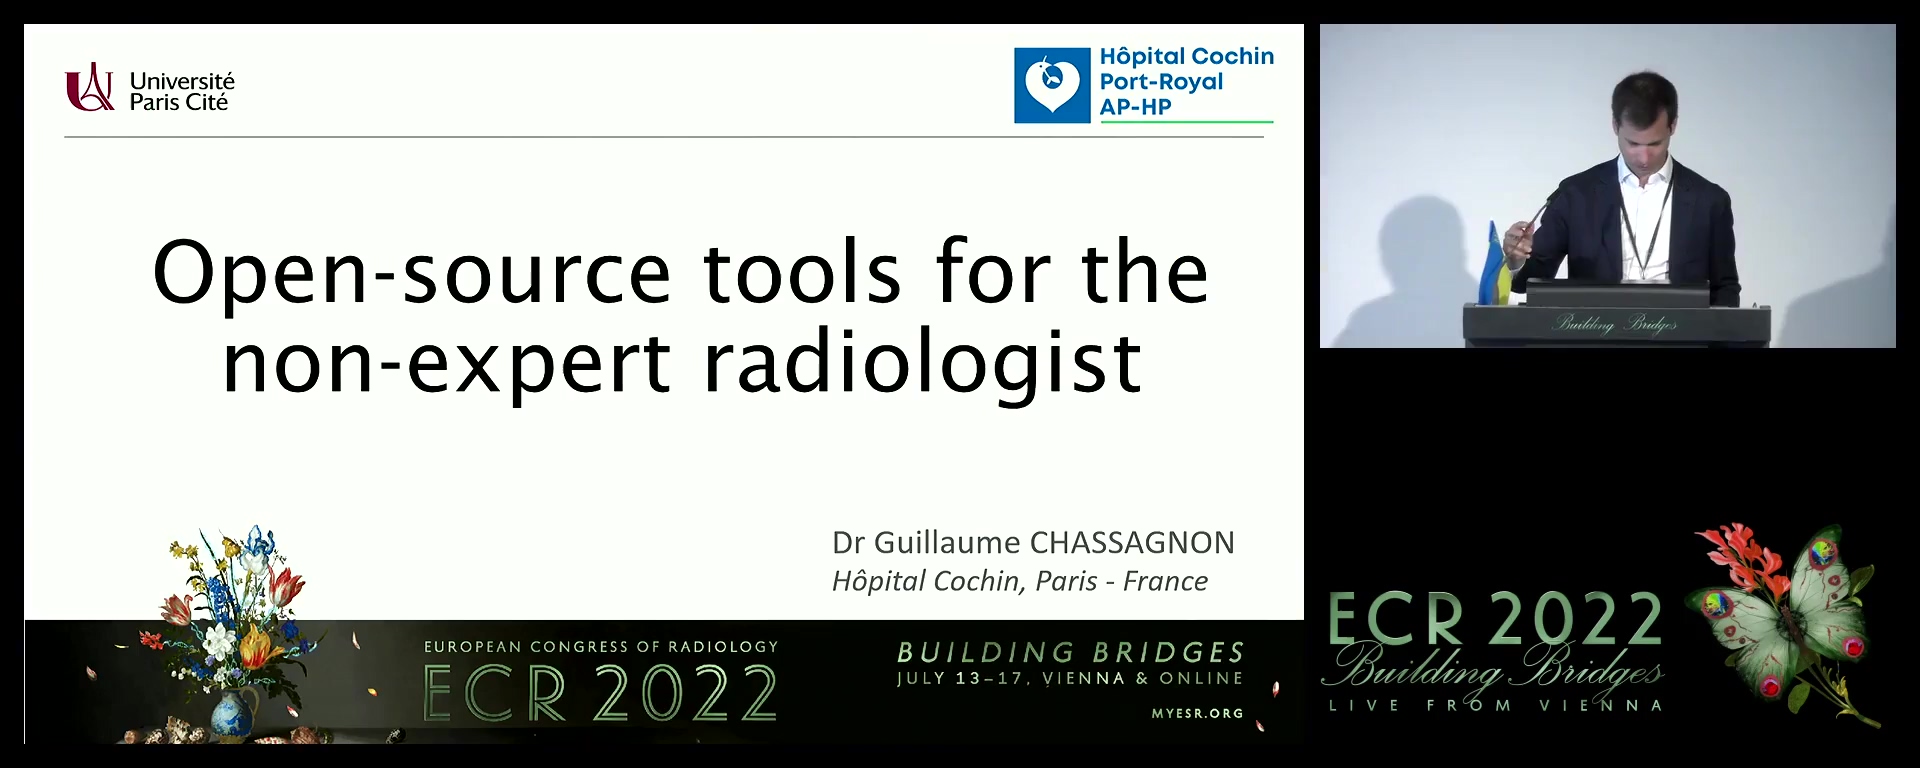 Open-source tools for the non-expert radiologist - Guillaume Chassagnon, Paris / FR